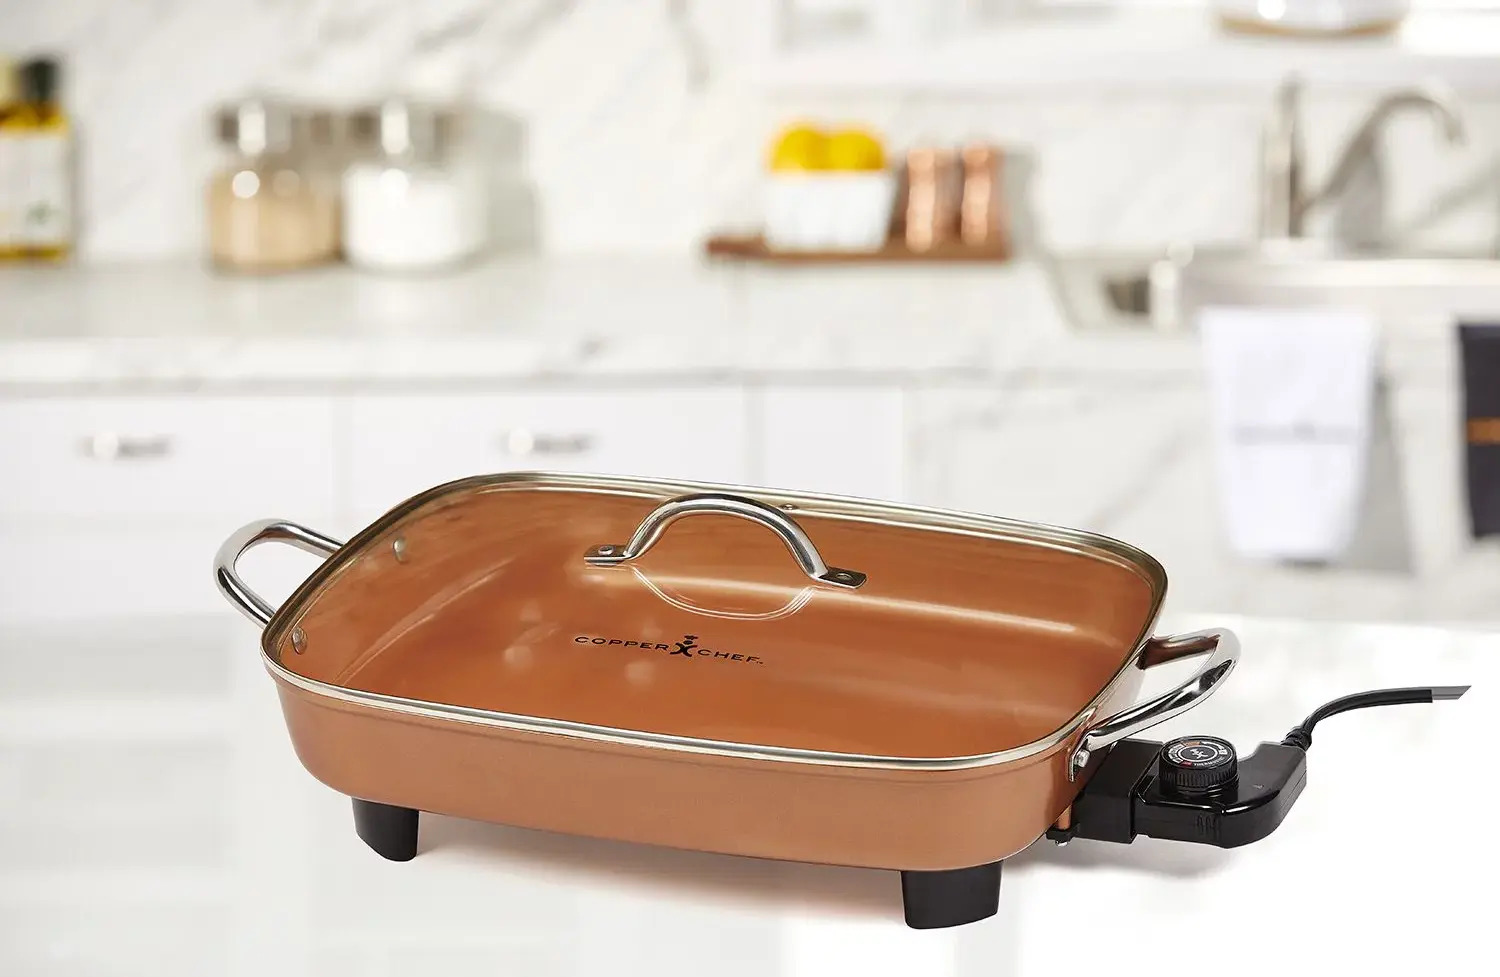 https://storables.com/wp-content/uploads/2023/08/12-amazing-copper-chef-electric-skillet-for-2023-1690950495.jpg